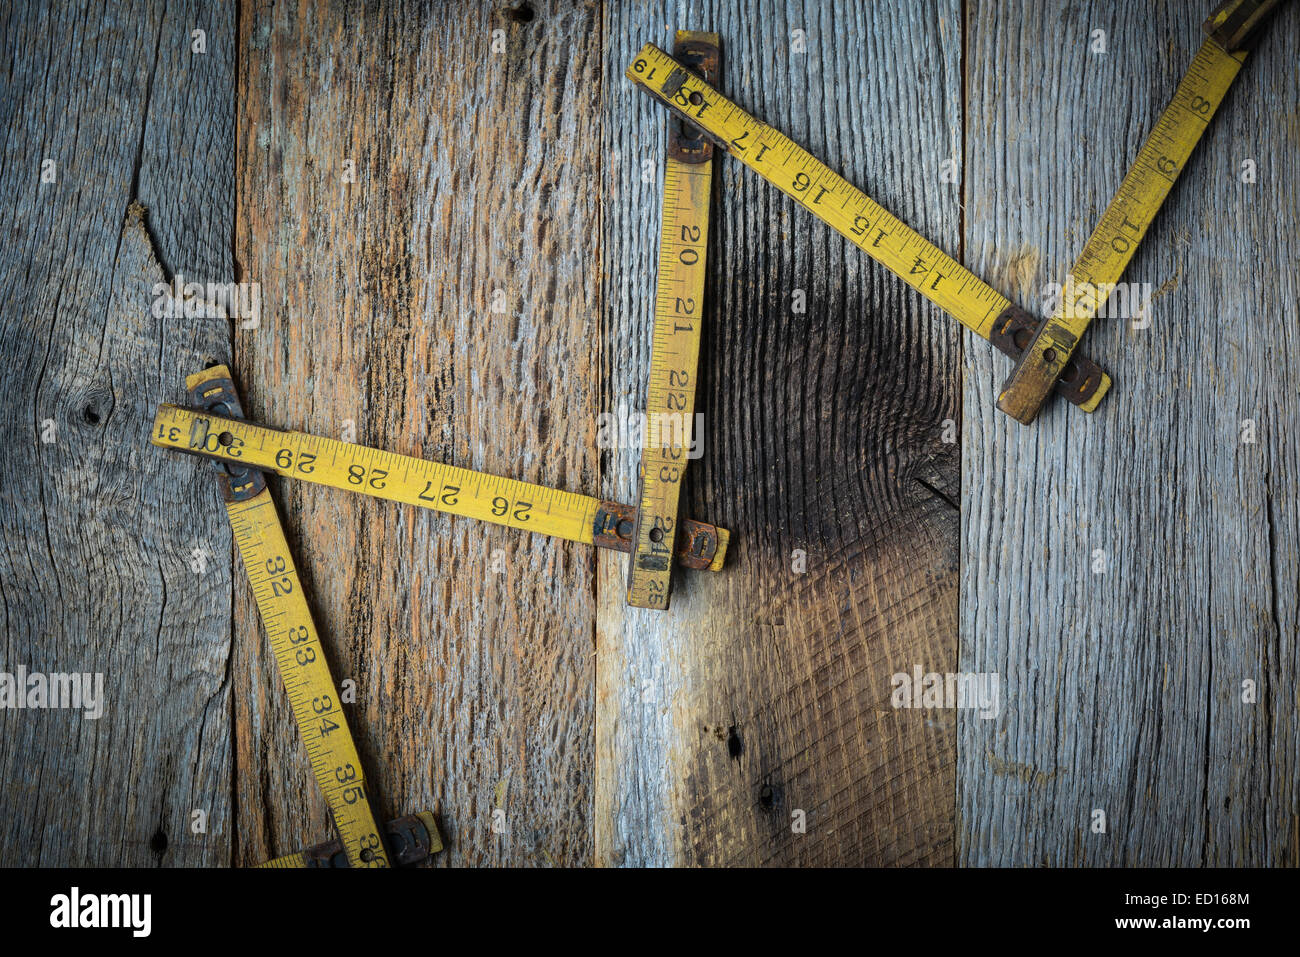 Old Tape Measure on Rustic Wood Background Stock Photo